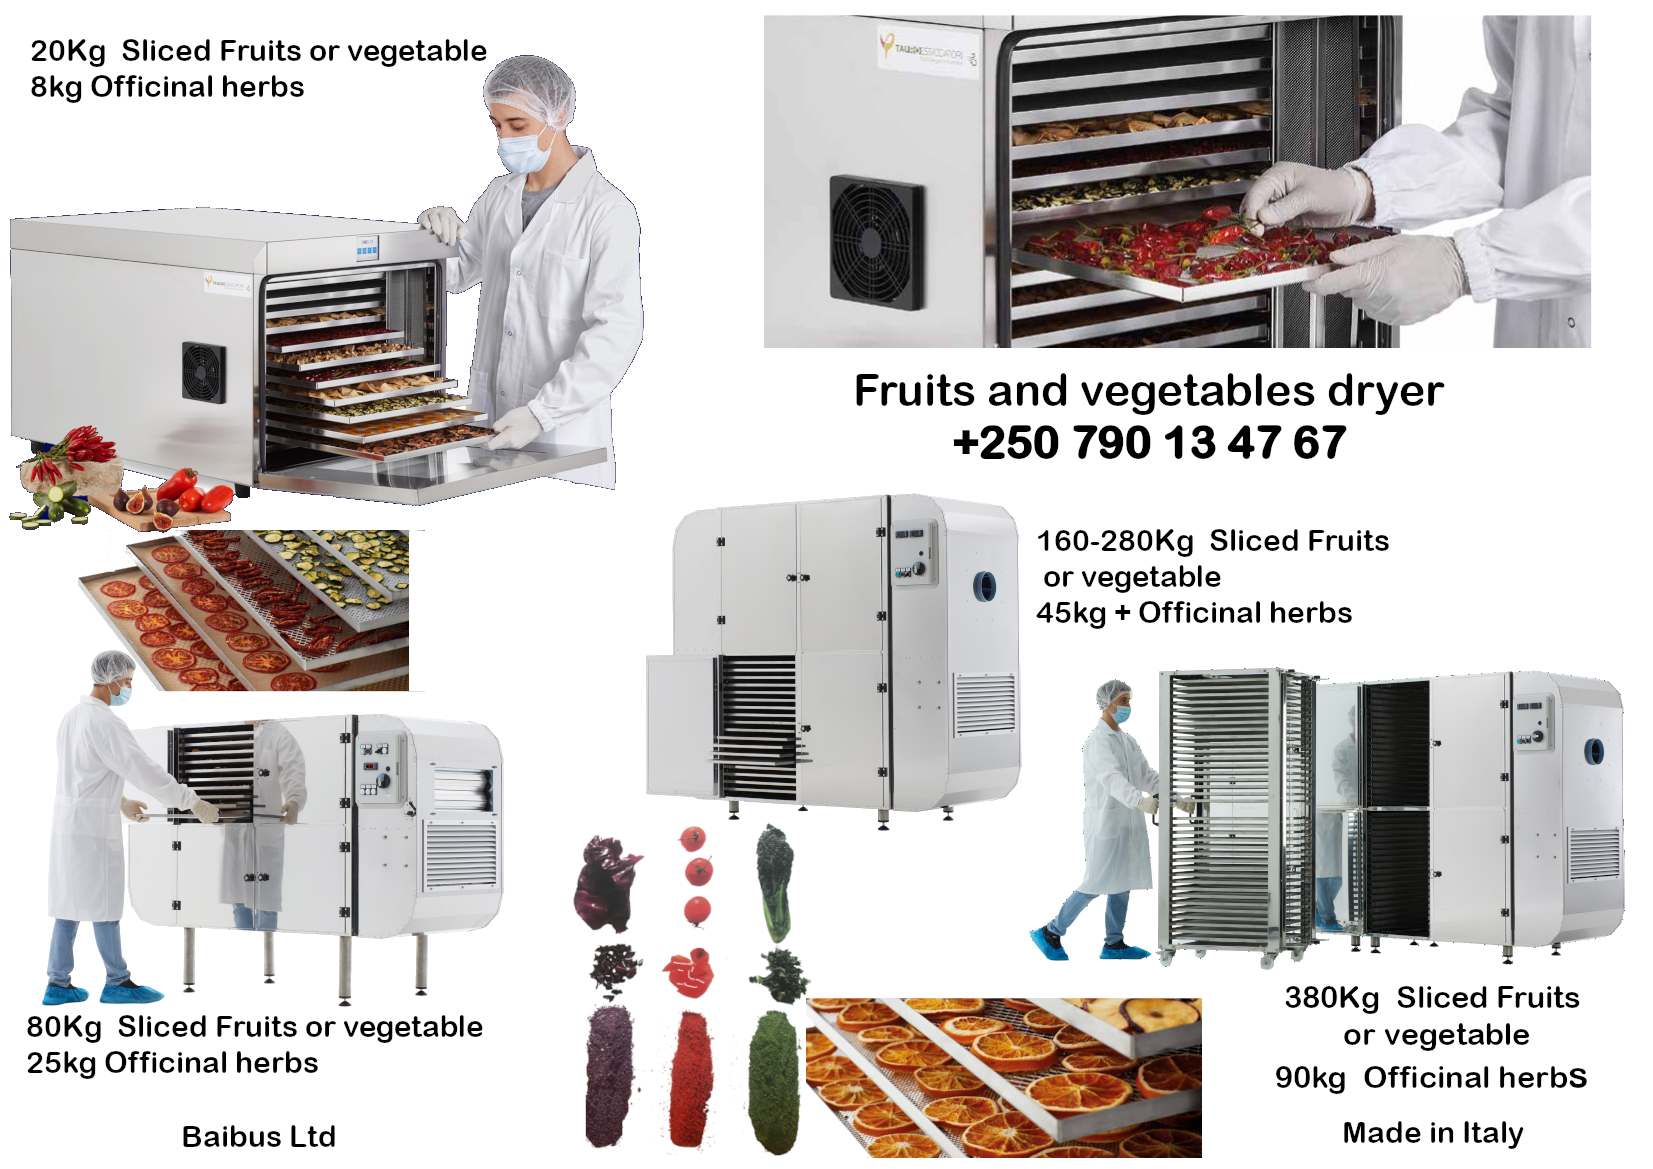 Fruits and vegetables dryer.  WhatsApp: +250 790 13 47 67